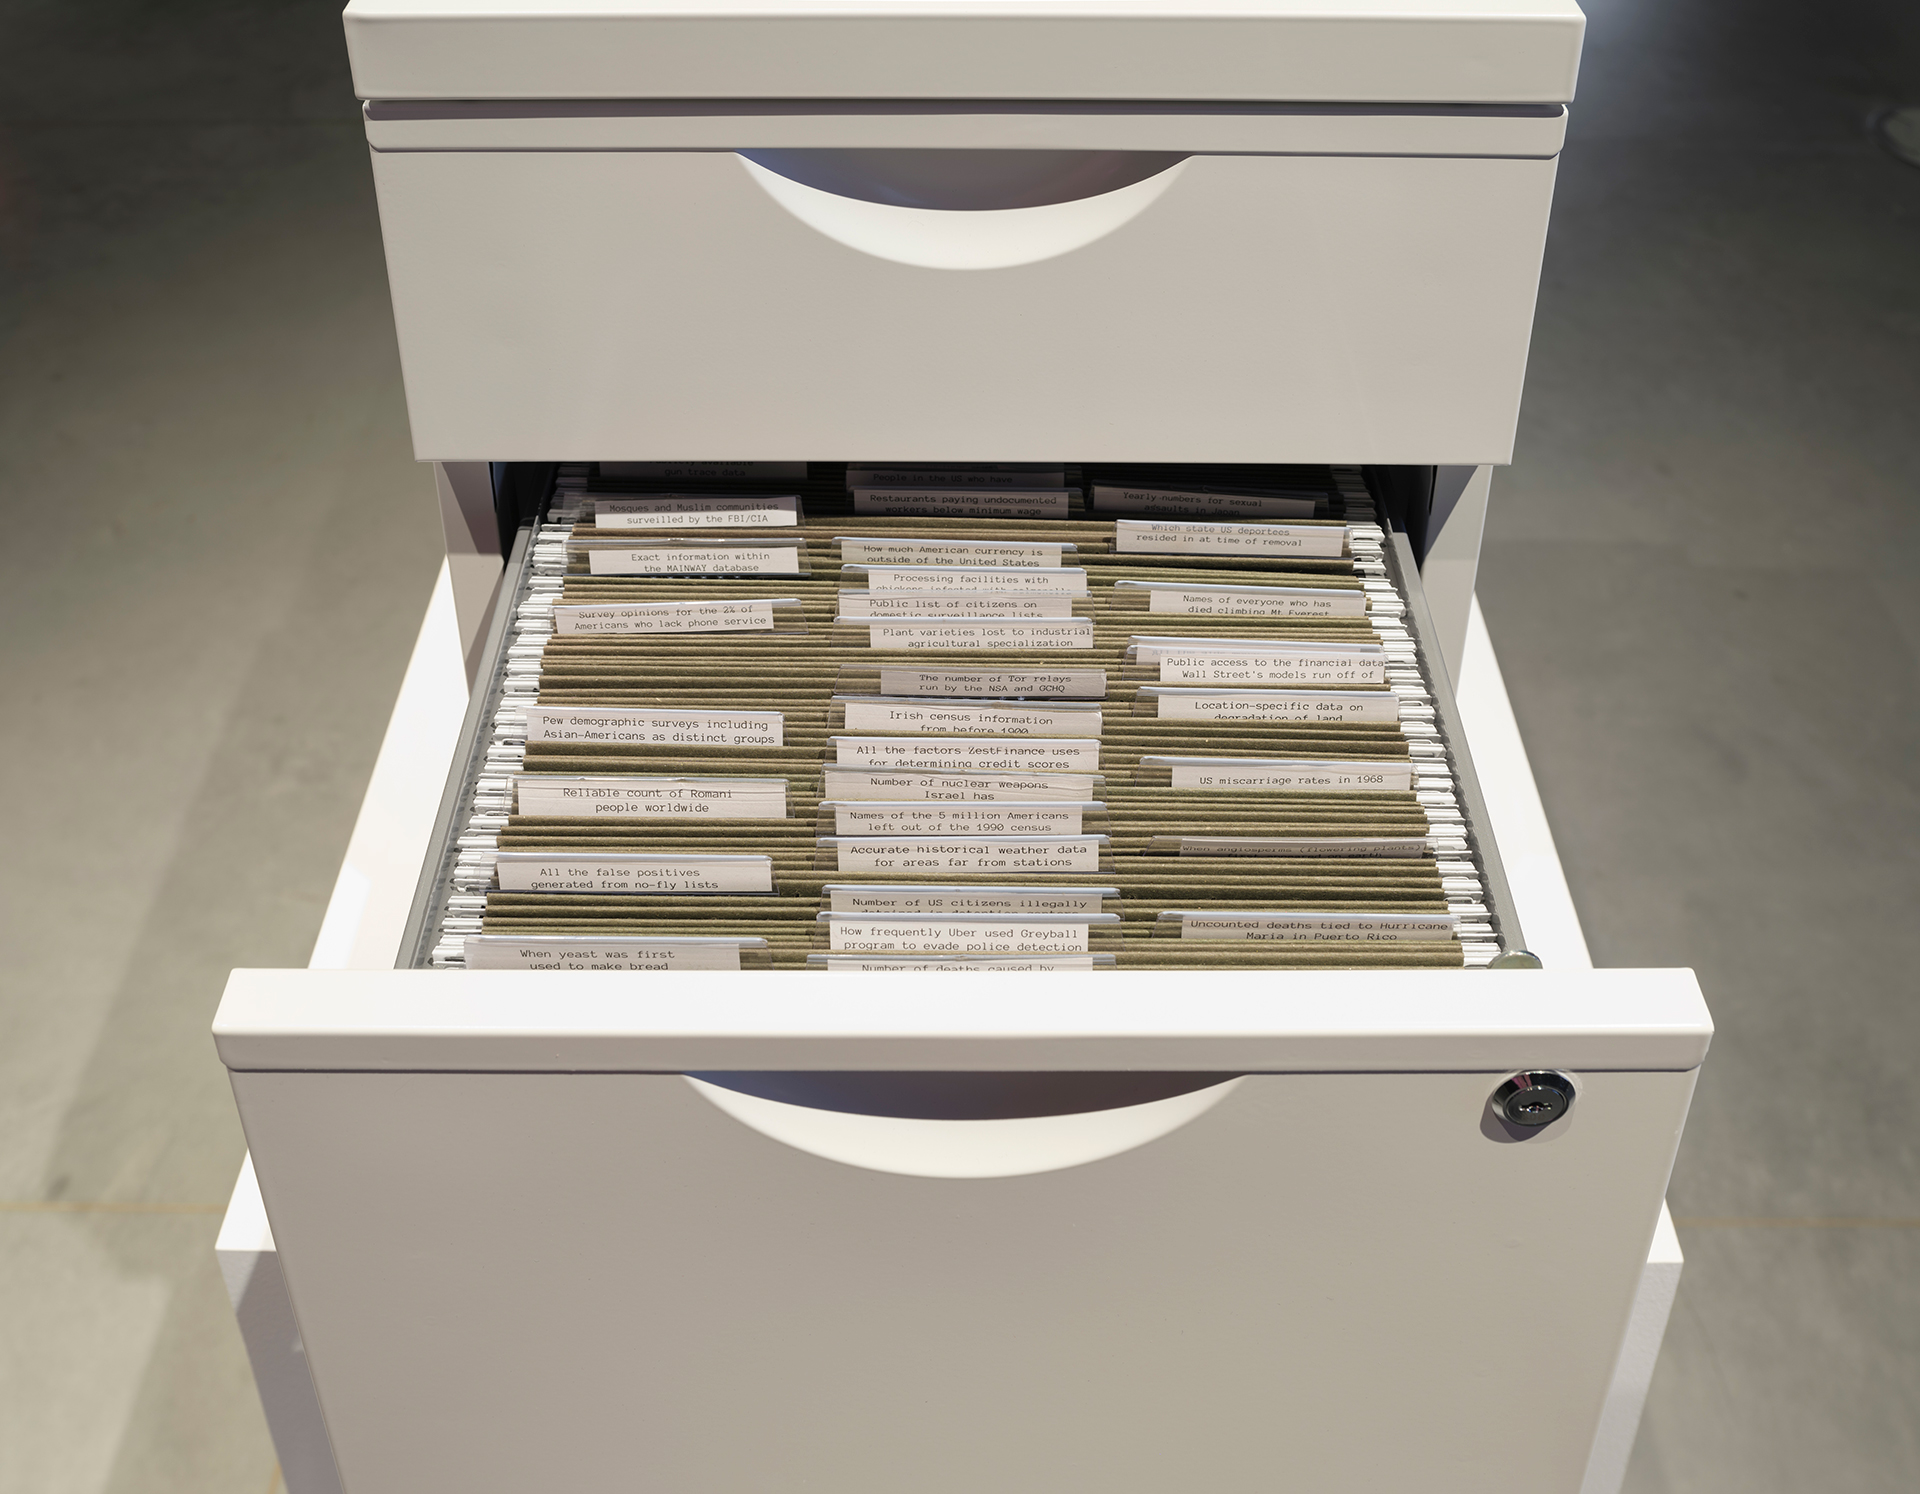 The open drawer of a white filing cabinet. The drawer is filled with brown folders that have white tabs on top. Each folder is labeled.